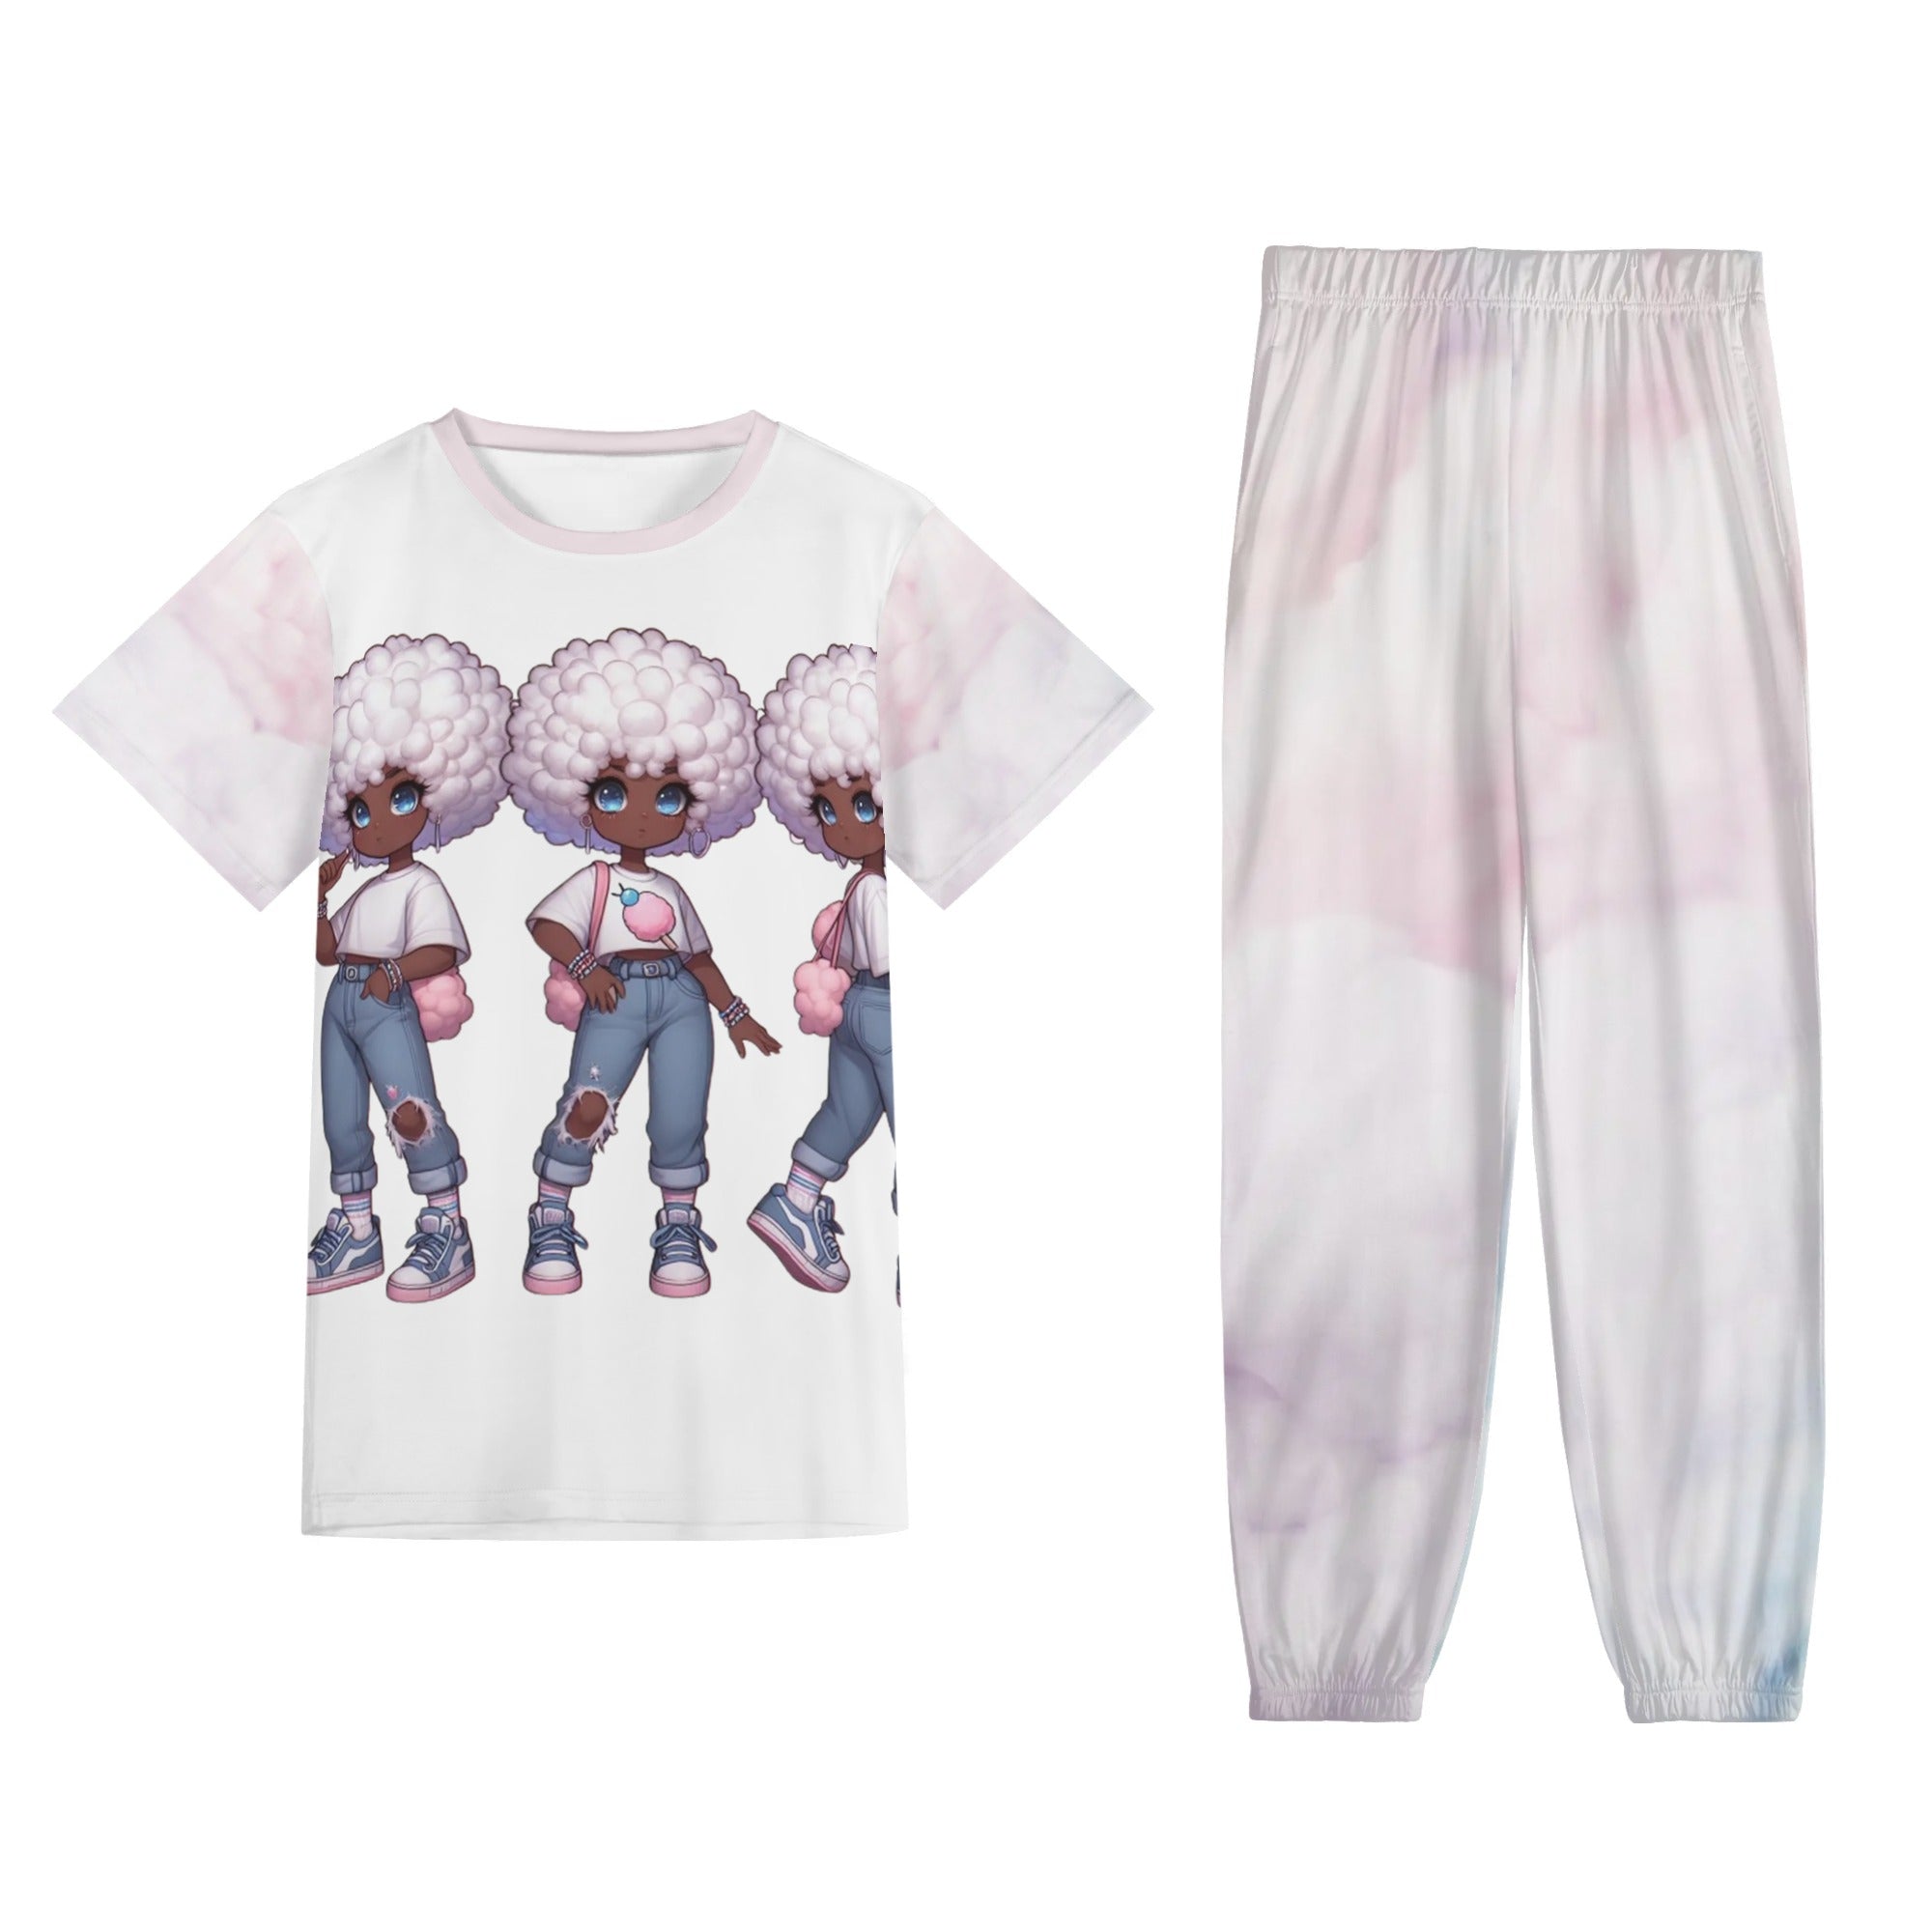 Cotton Candy Stylie Teens and Womens Short Sleeve Sports Outfit Set